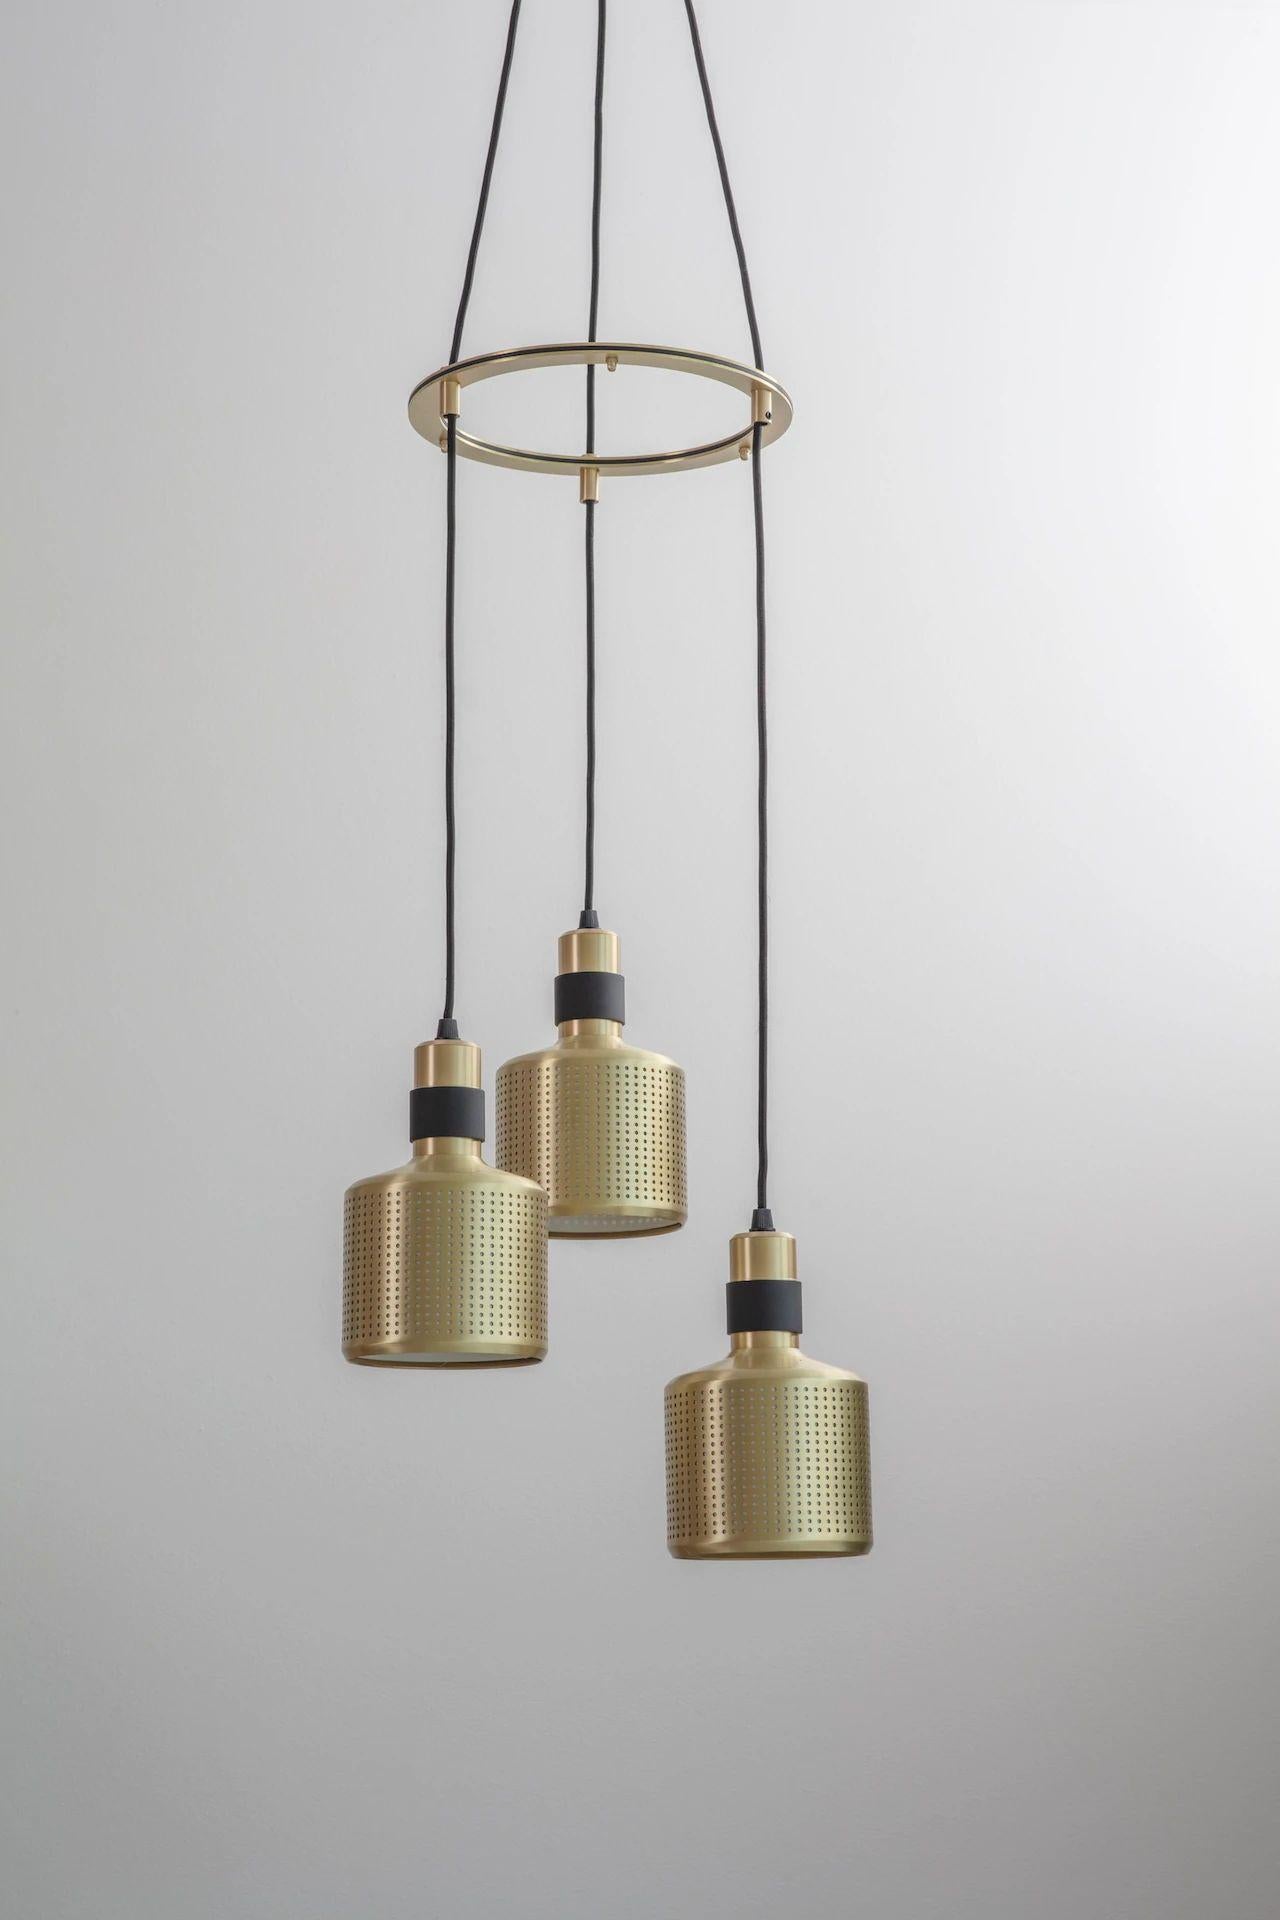 Brass riddle pendant by Bert Frank
Dimensions: H 20 x W 12 x D 12 cm
Materials: brass and steel

Available finishes: brass and black
All our lamps can be wired according to each country. If sold to the USA it will be wired for the USA for